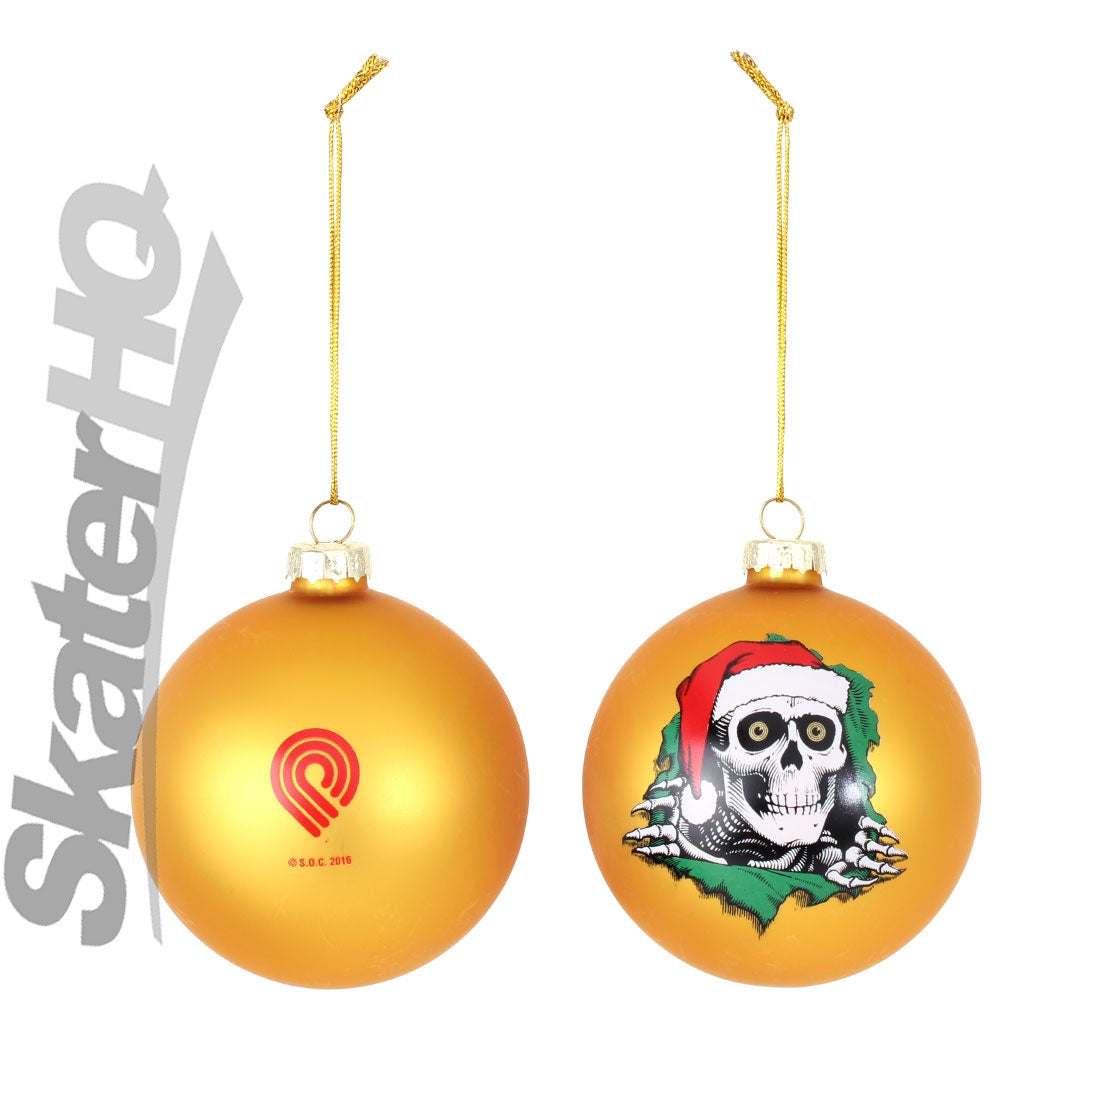 Powell Peralta Holiday Ornaments 4pk Skateboard Accessories